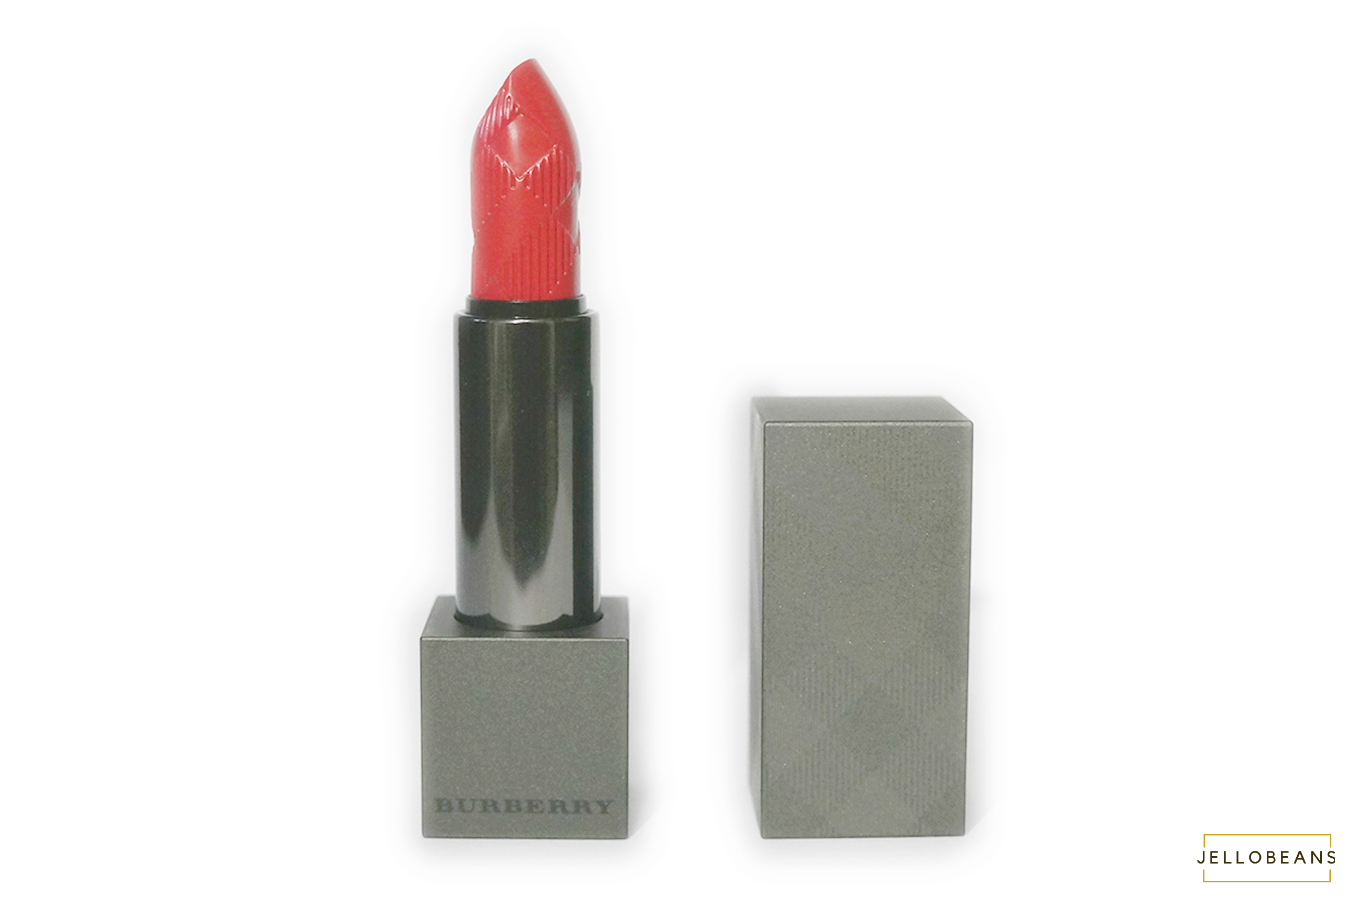 Burberry Lip Velvet Long Wear Lipstick in Rosy Red No. 428 | Review,  Swatch, Photos - Jello Beans